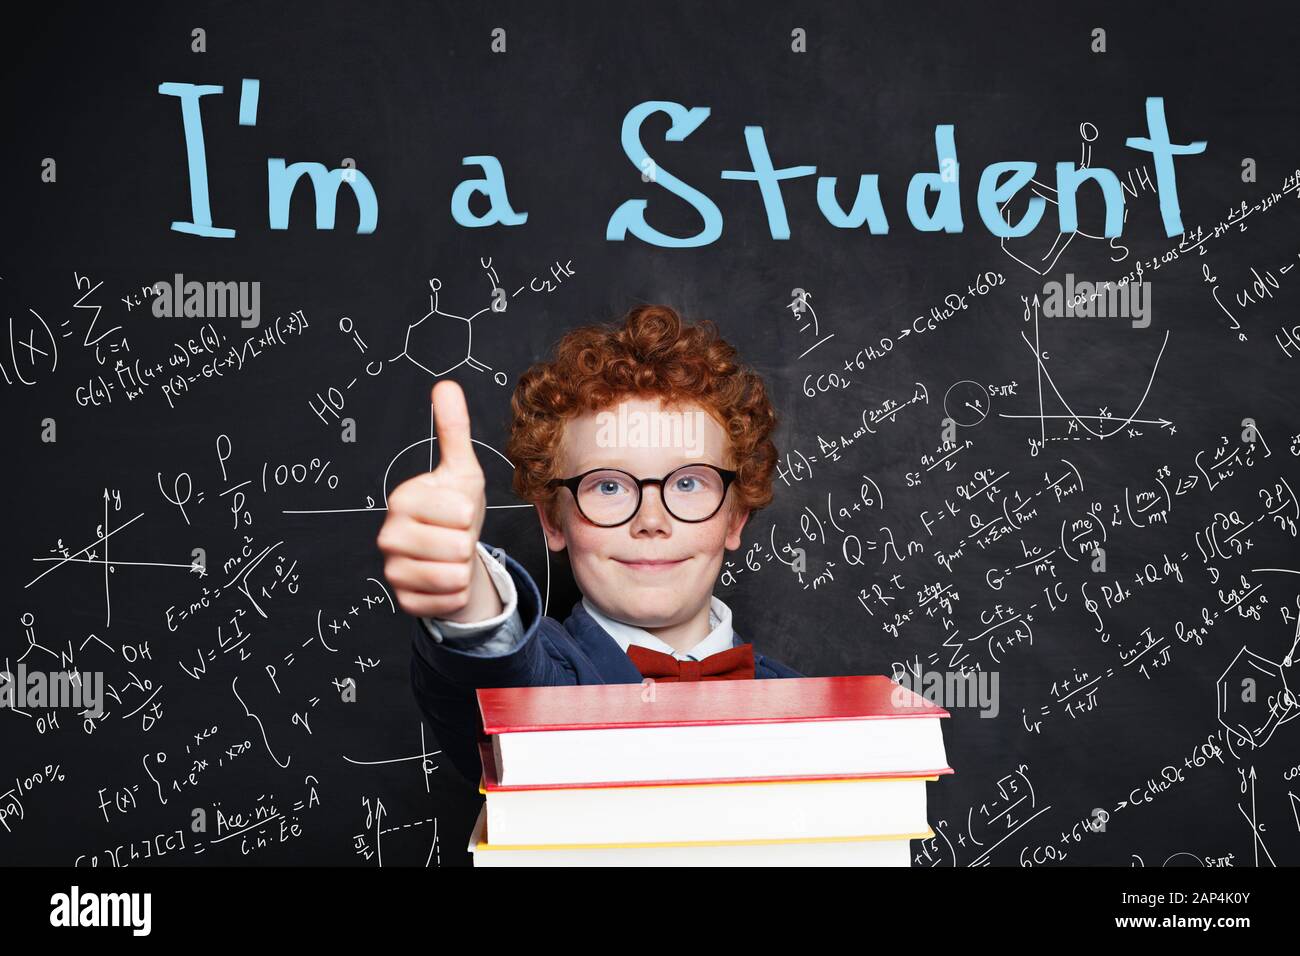 Kid school boy in student uniform holding books and showing thumb up, back to school concept Stock Photo